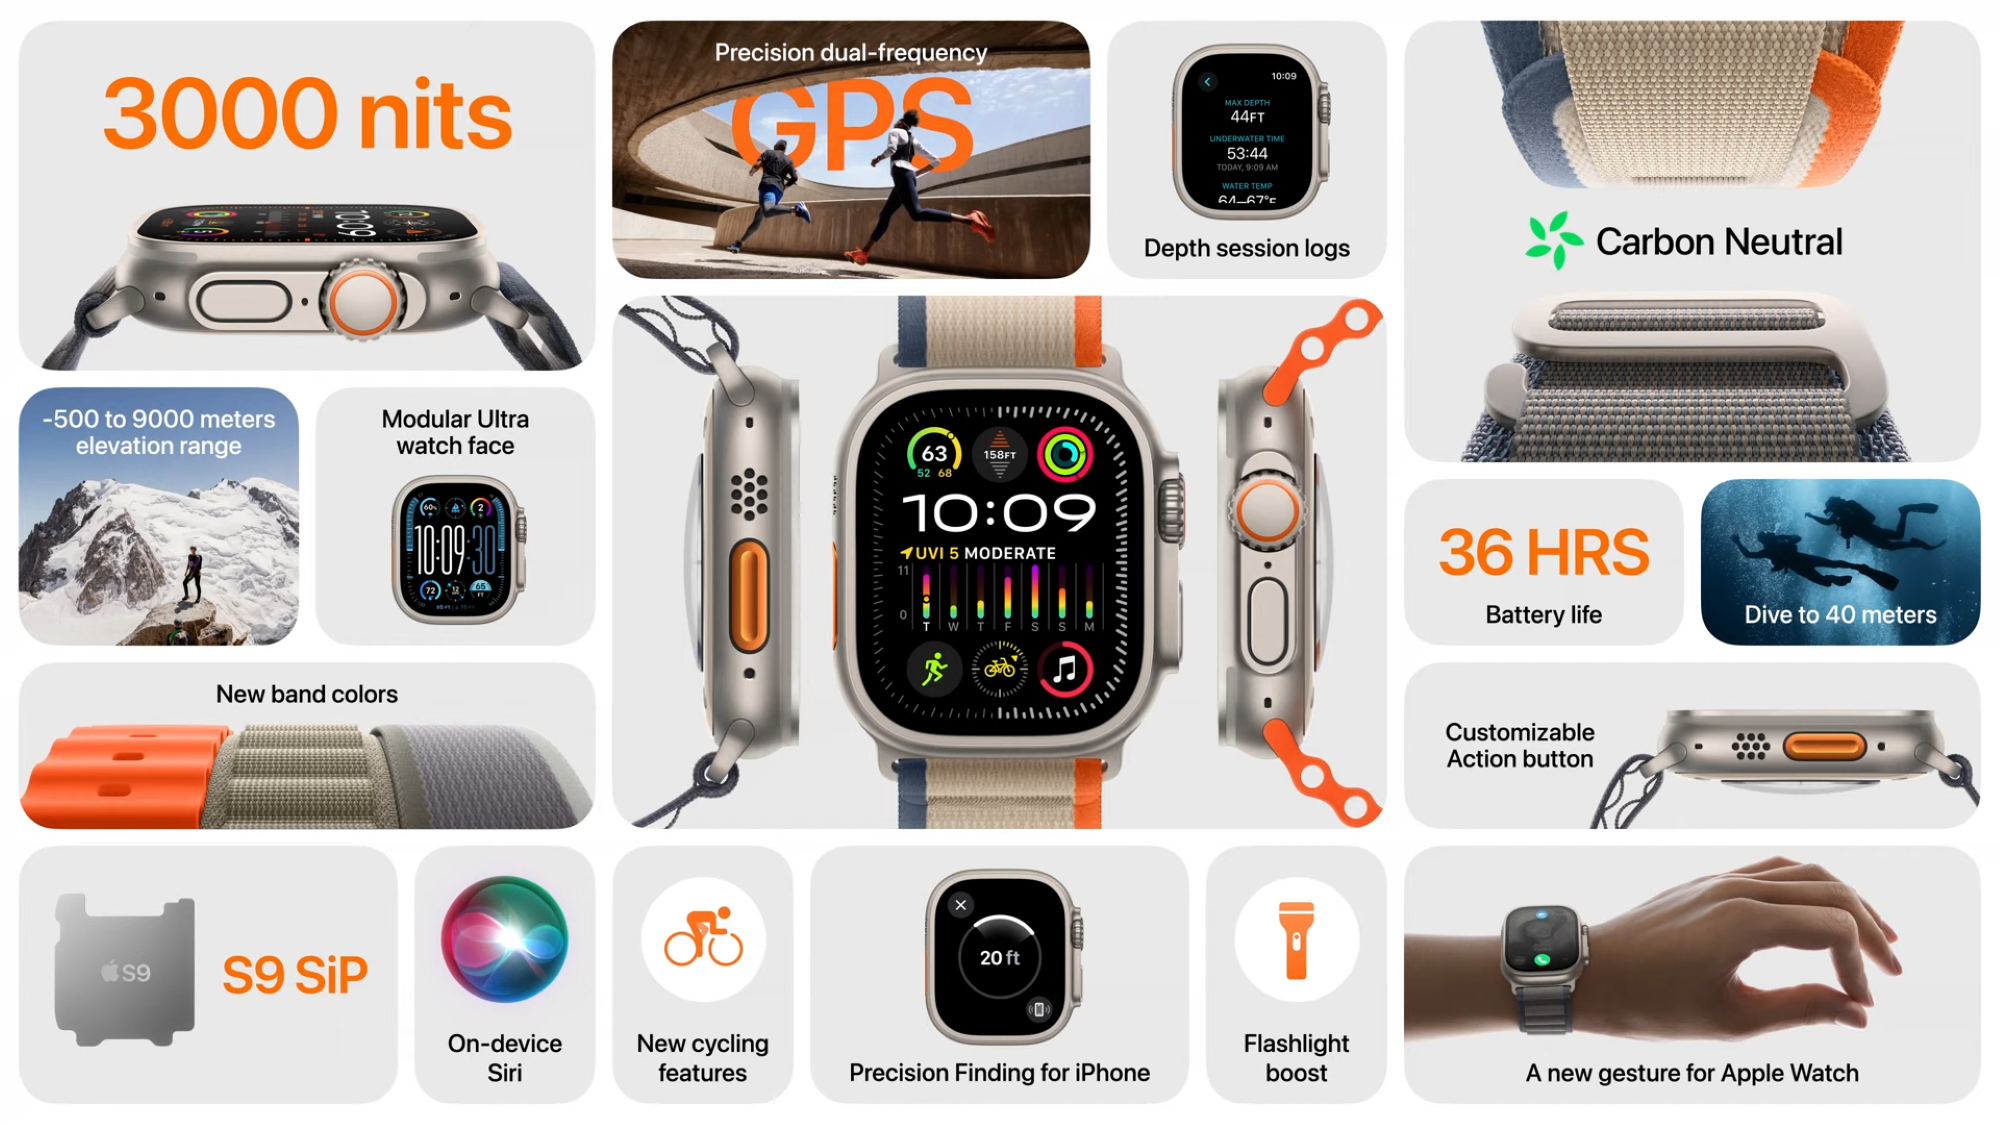 Apple Watch Ultra 2 Is Here: All You Need To Know About This High-Performance Device